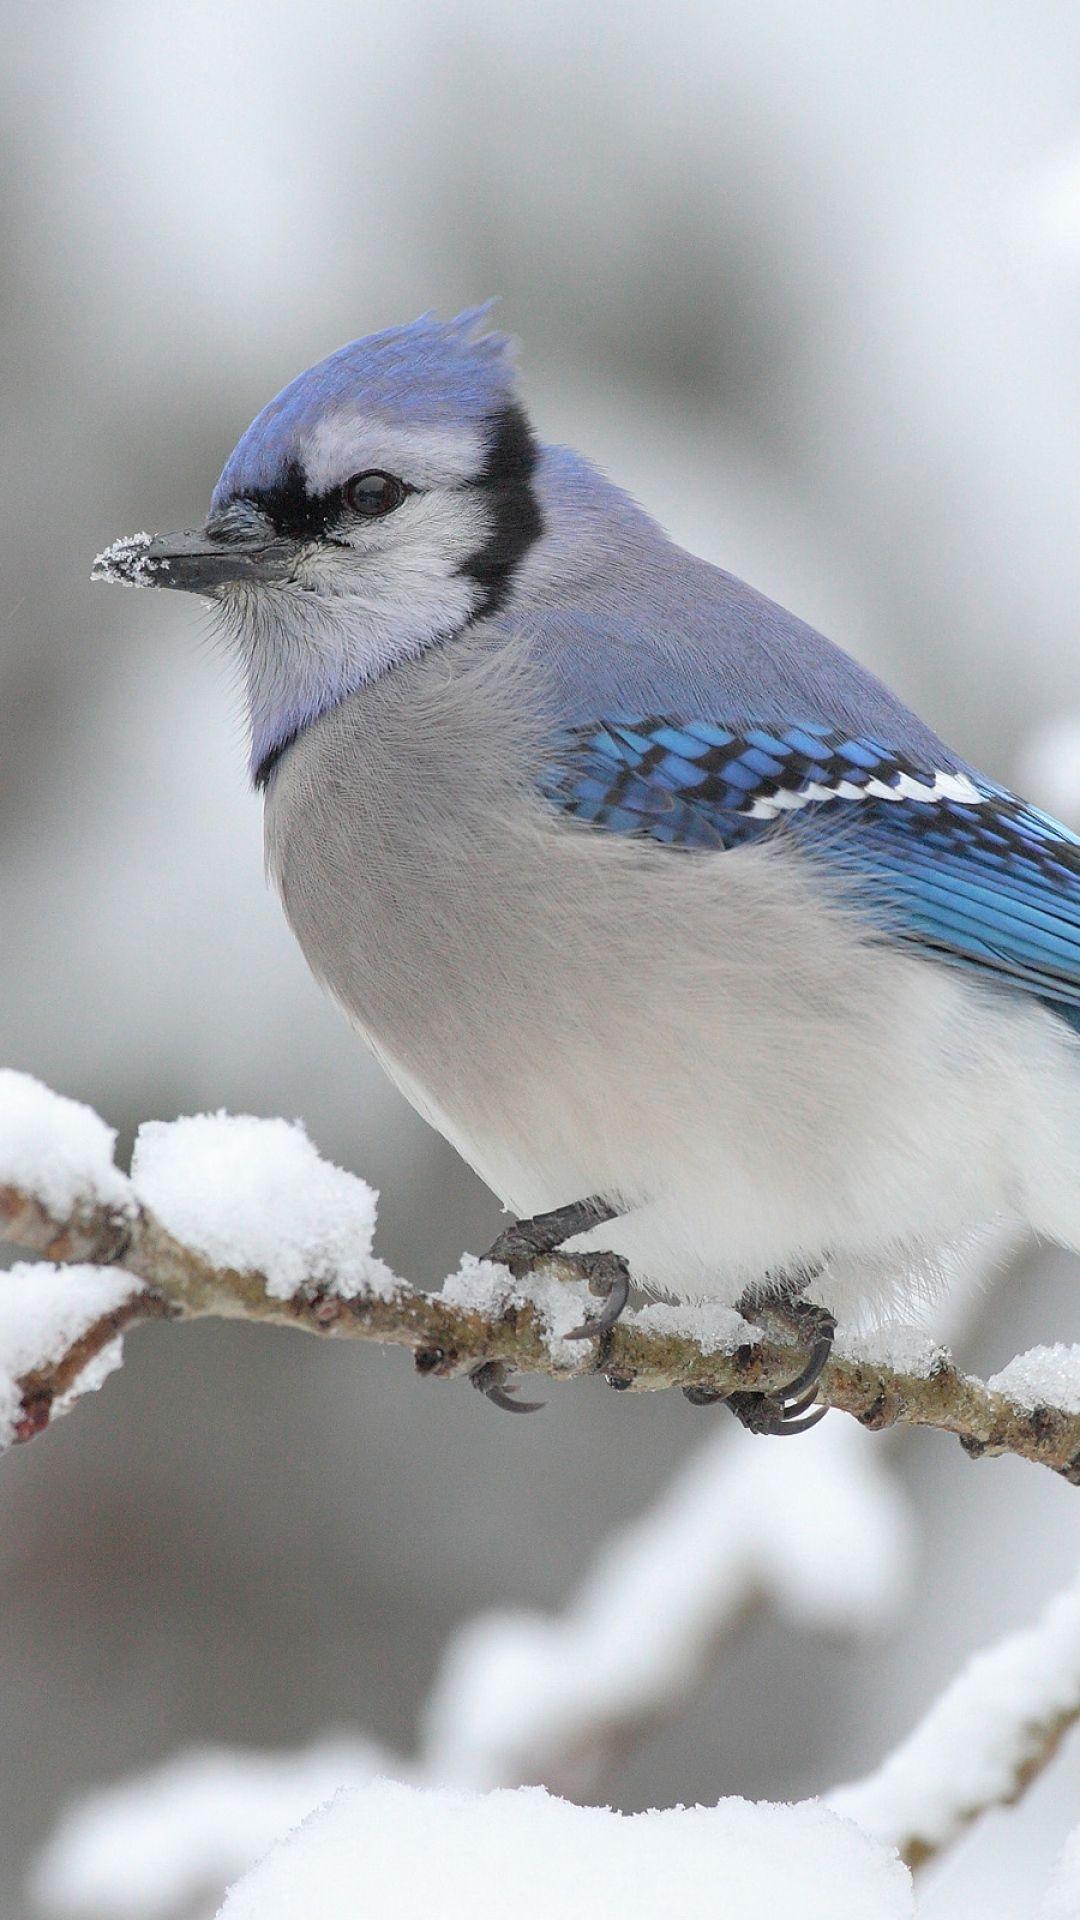 Blue jay sitting on a snowy branch. Birds of a Feather Flock